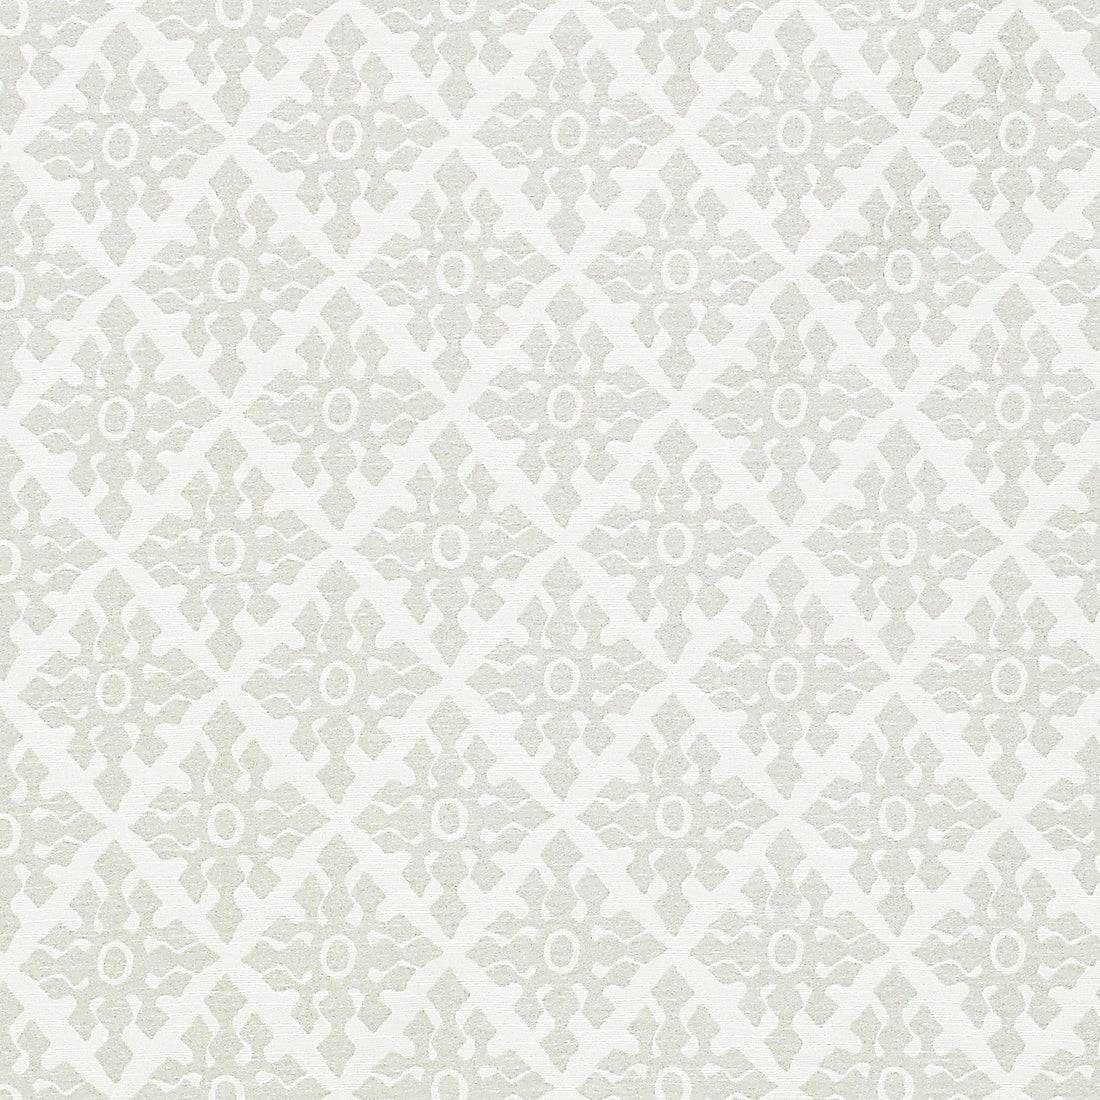 Ornamental Star fabric in grey color - pattern number WR 0001285B - by Scalamandre in the Old World Weavers collection